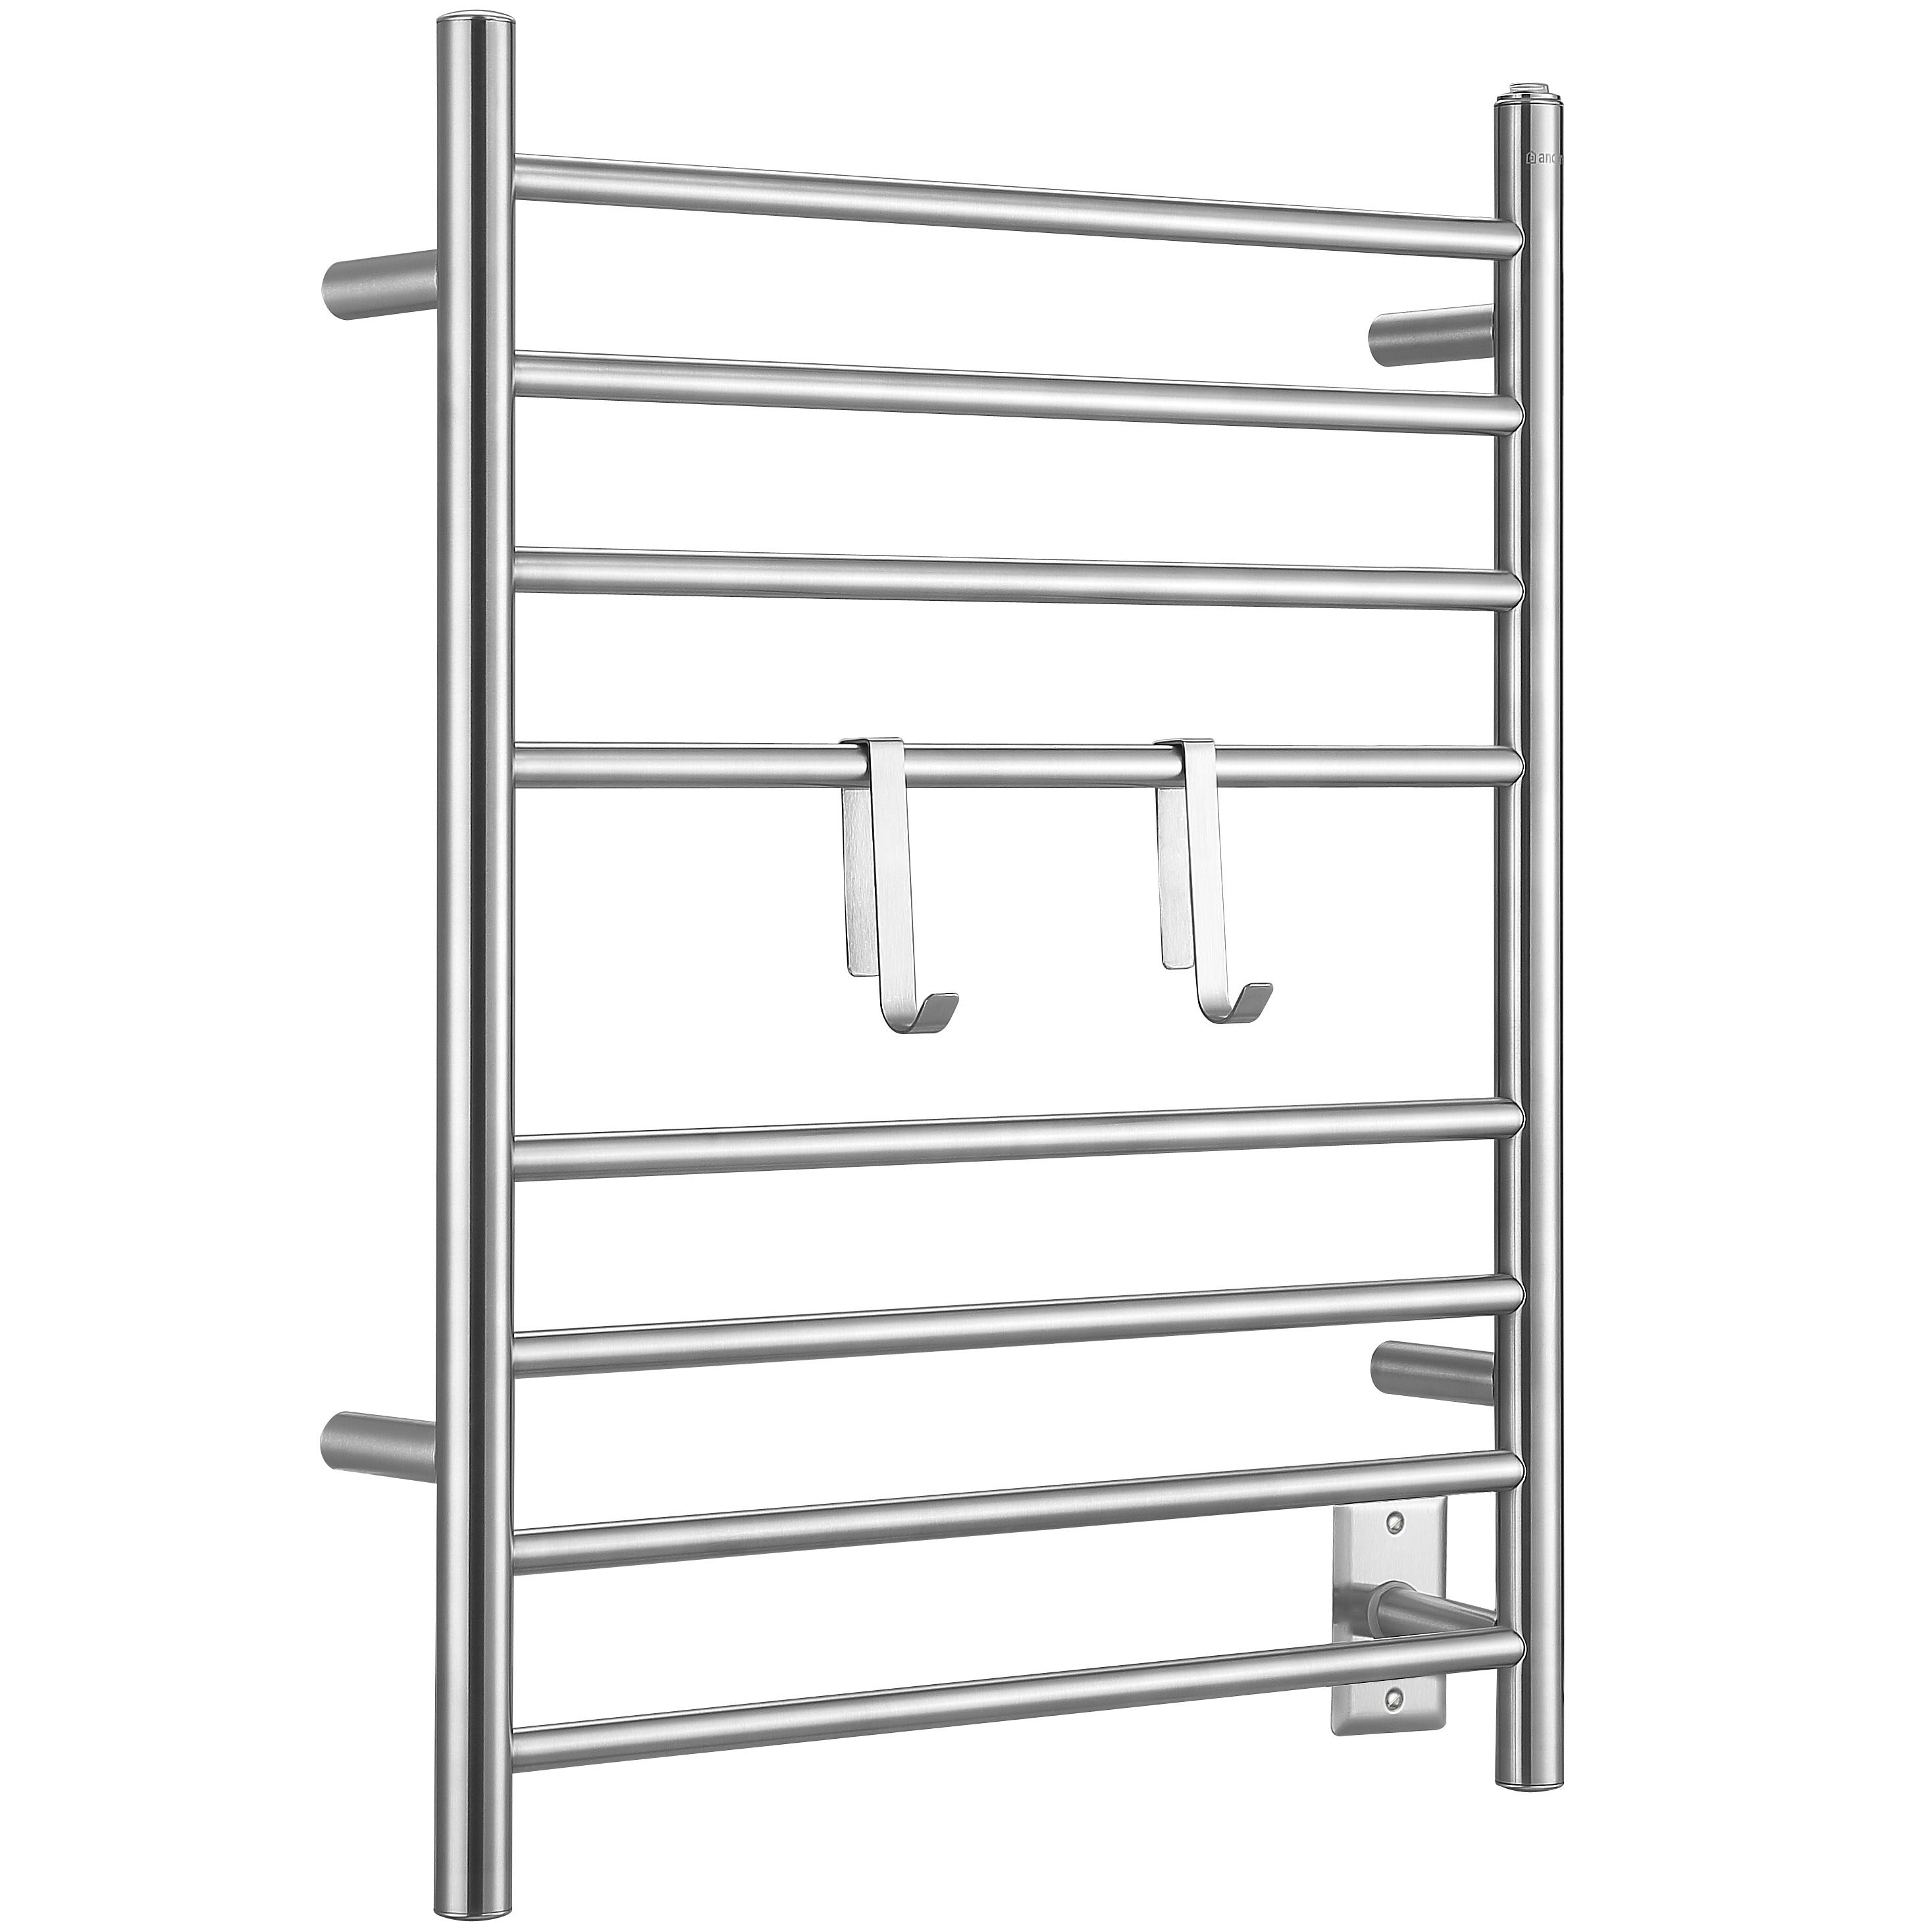 Ancona Prestige Dual 8 Bar Hardwired and Plug-in Towel Warmer with 2 Adjustable Hooks in Brushed Stainless Steel